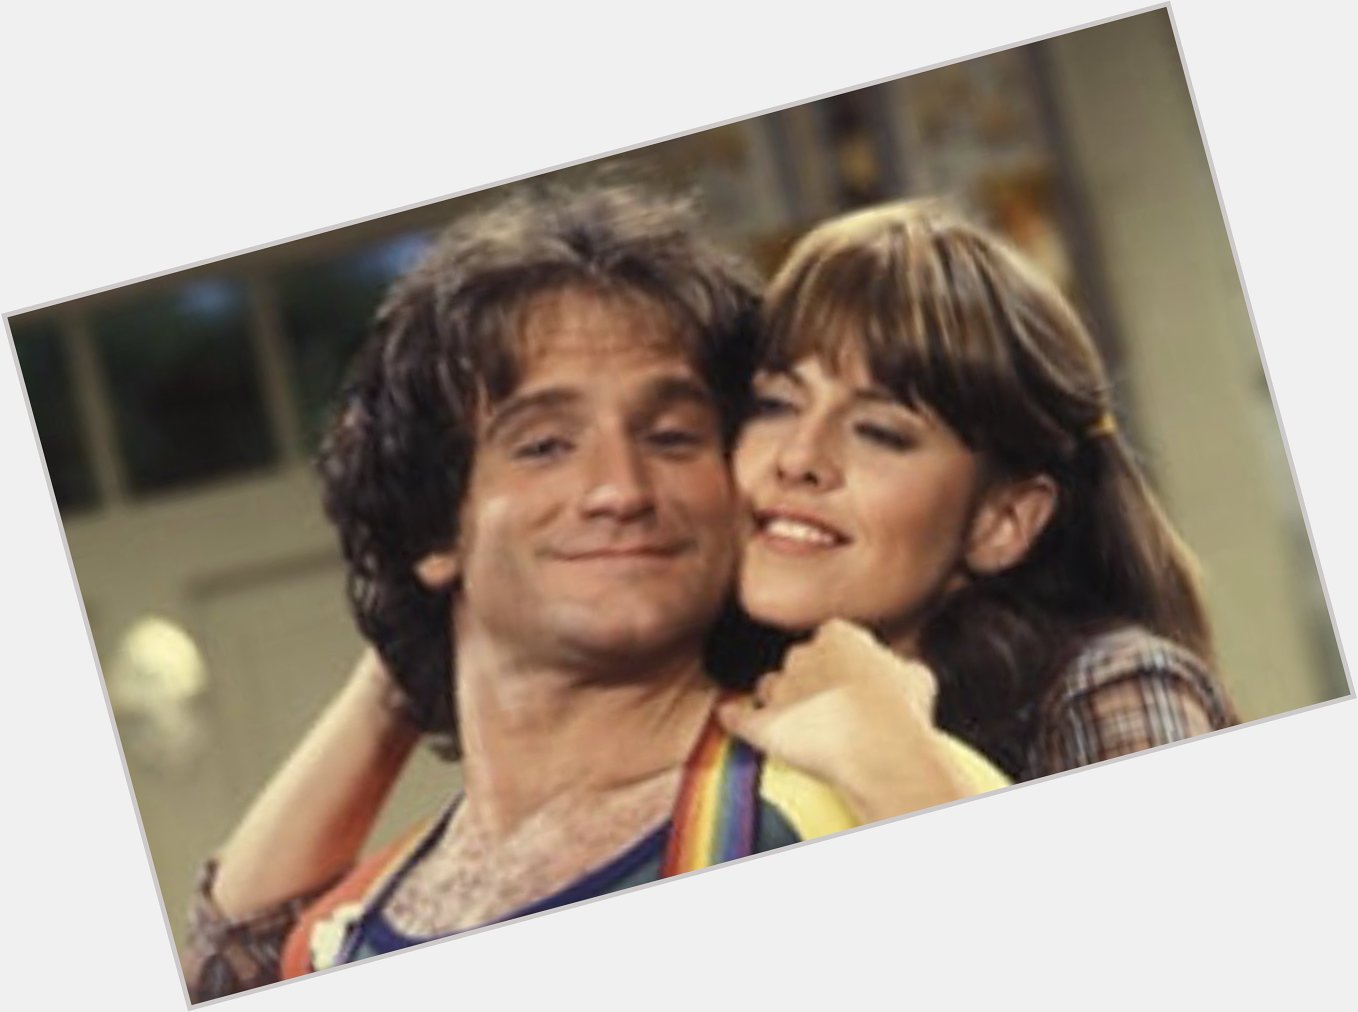  Happy Birthday to Pam Dawber! I liked her as Mindy in \"Mork & Mindy.\"     